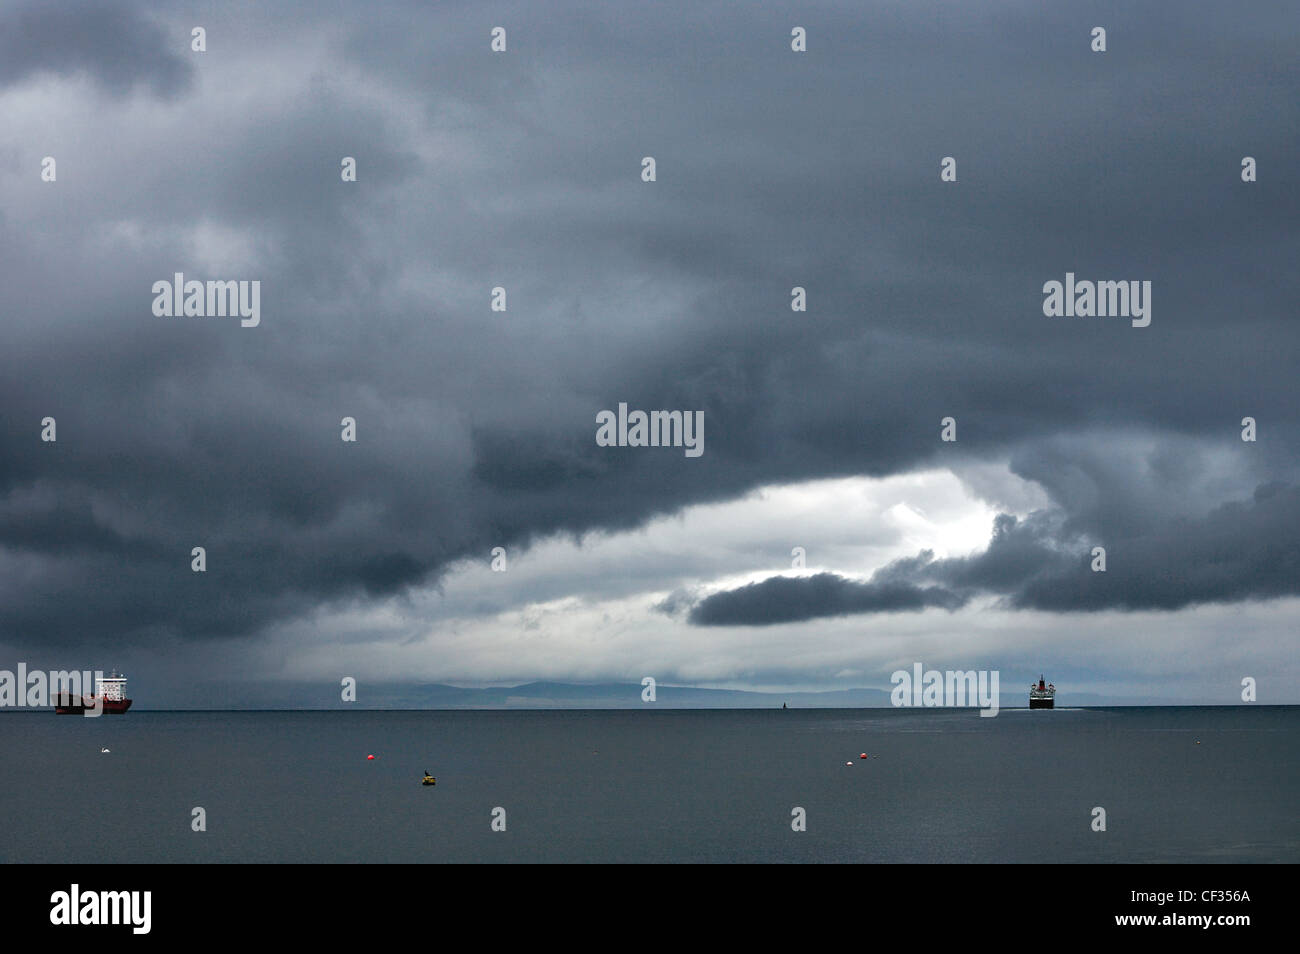 Stormy skies over a cargo ship and The MV Caledonian Isles, a ferry that operates between Ardrossan on the Ayrshire coast and Br Stock Photo